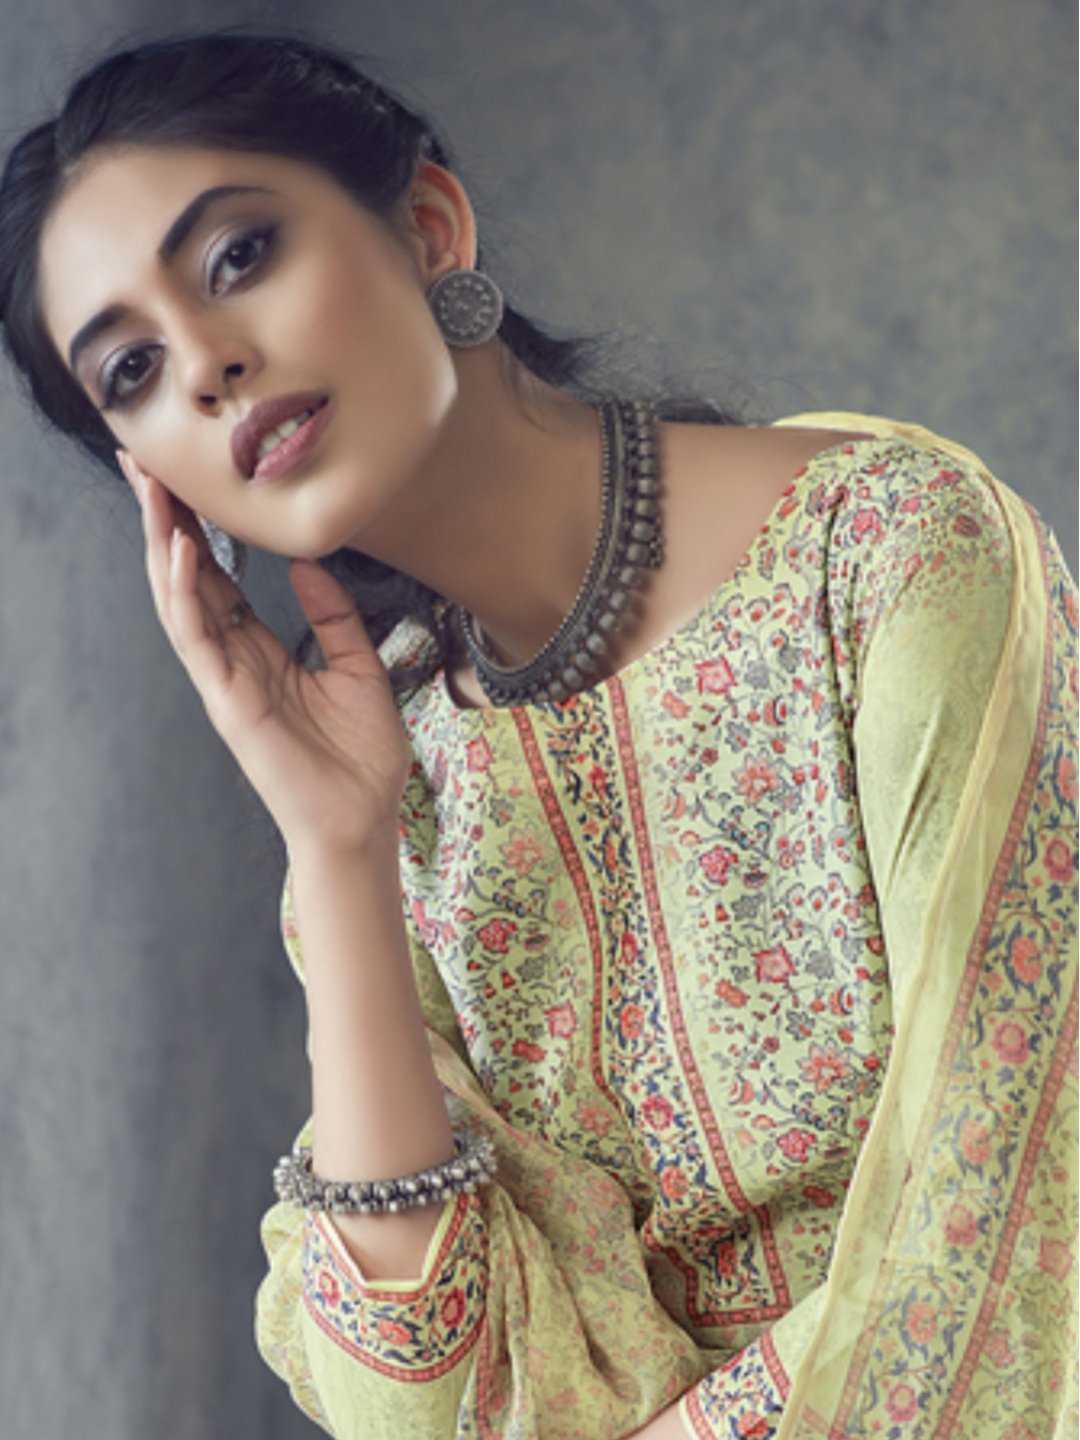 Printed Un-Stitched Light Yellow Palazzo Suit with Dupatta - Stilento